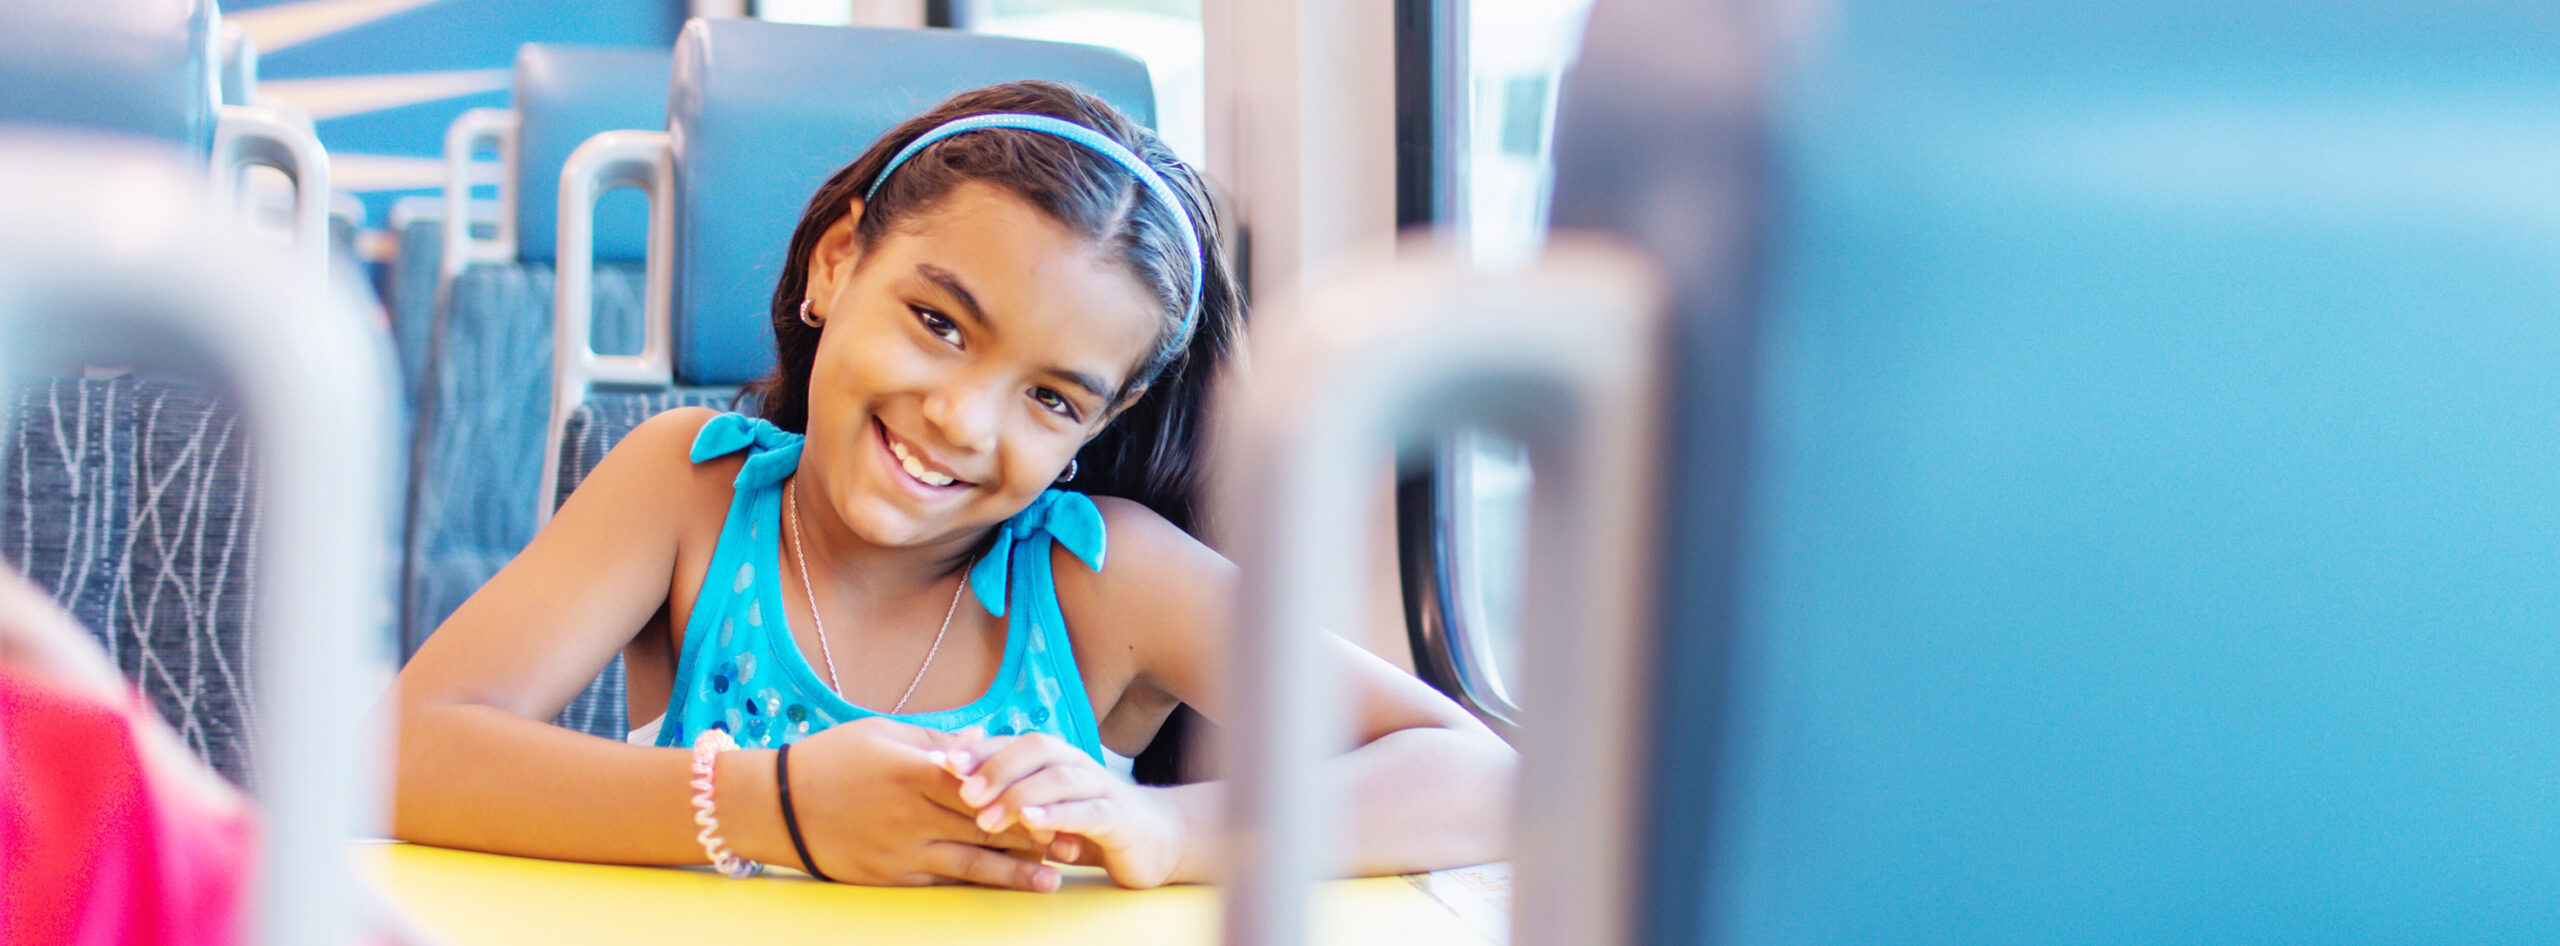 Masthead image - child passenger aboard SunRail train, sitting in a seat with arms on table.